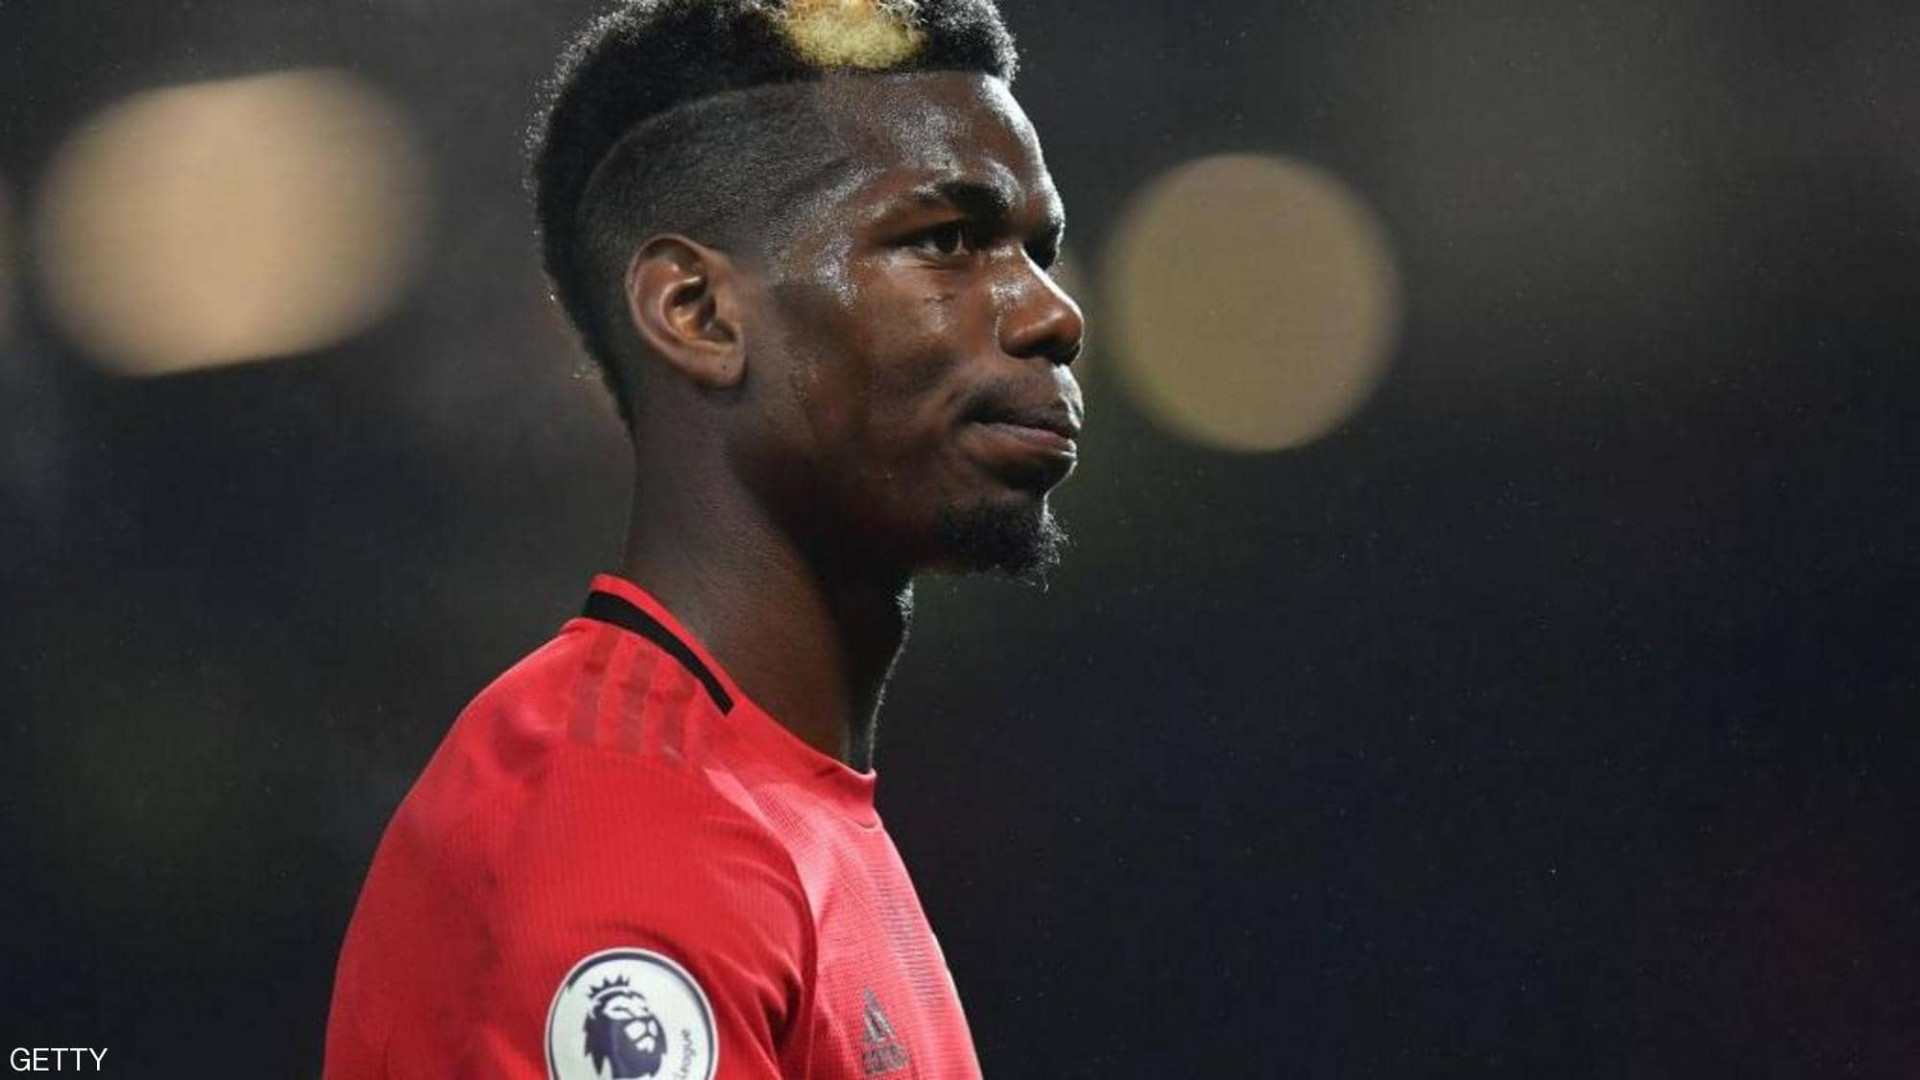 PAUL POGBA is 'interested' in Barcelona